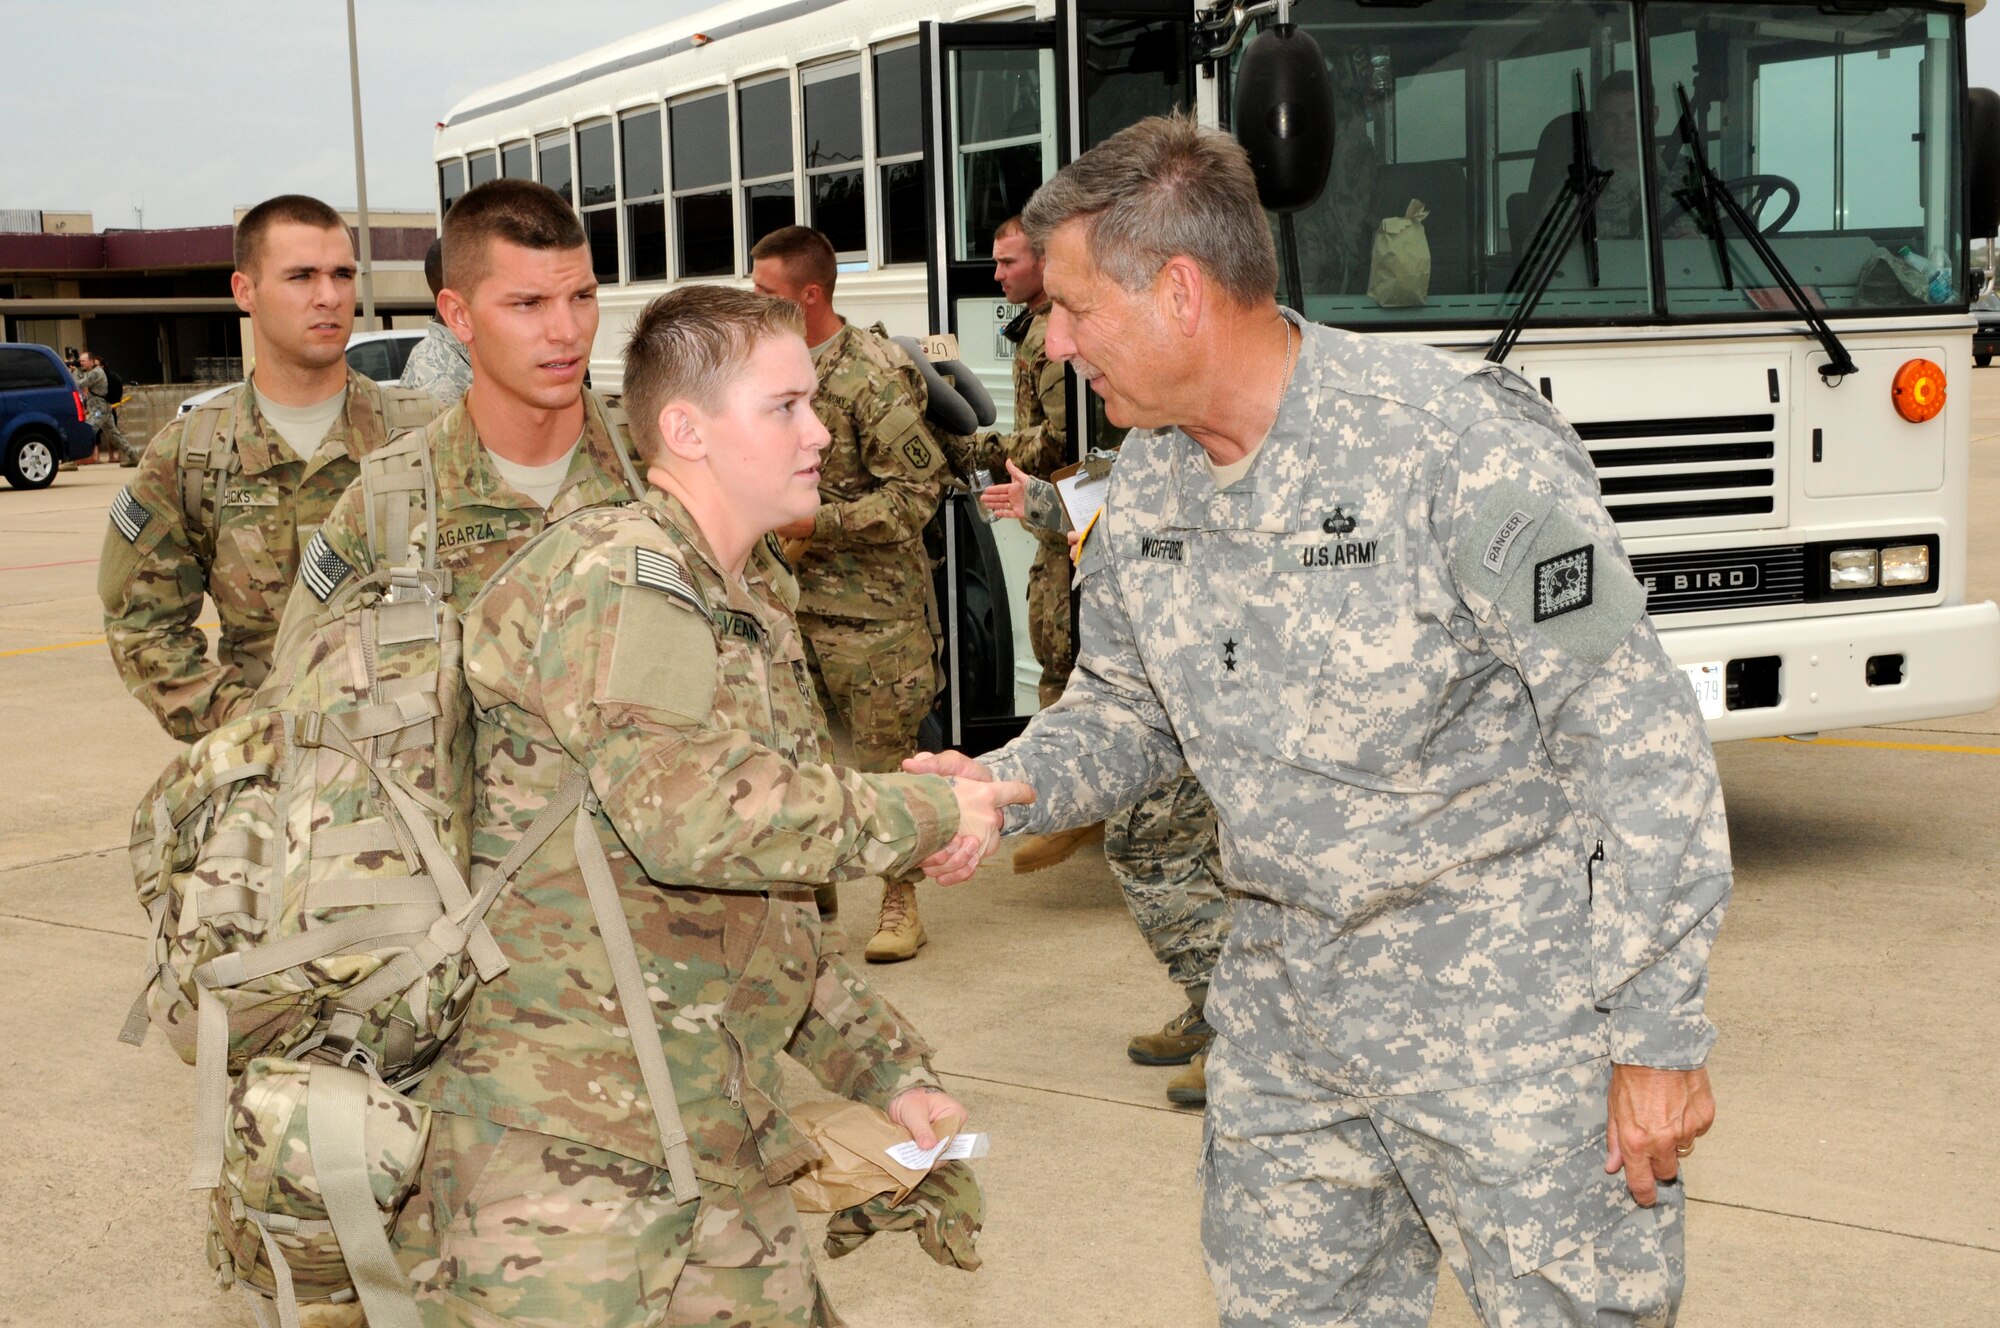 Maj. Gen. William Wofford, adjutant general for the Arkansas National Guard, shakes hands with 188th Fighter Wing Airmen prior their departure from Fort Smith, Ark., on a McDonnell Douglas MD-11 July 2, 2012. Approximately 275 Airmen with the 188th departed Fort Smith for Afghanistan in support of Operation Enduring Freedom. (National Guard photo by Senior Master Sgt. Dennis Brambl/188th Fighter Wing Public Affairs)